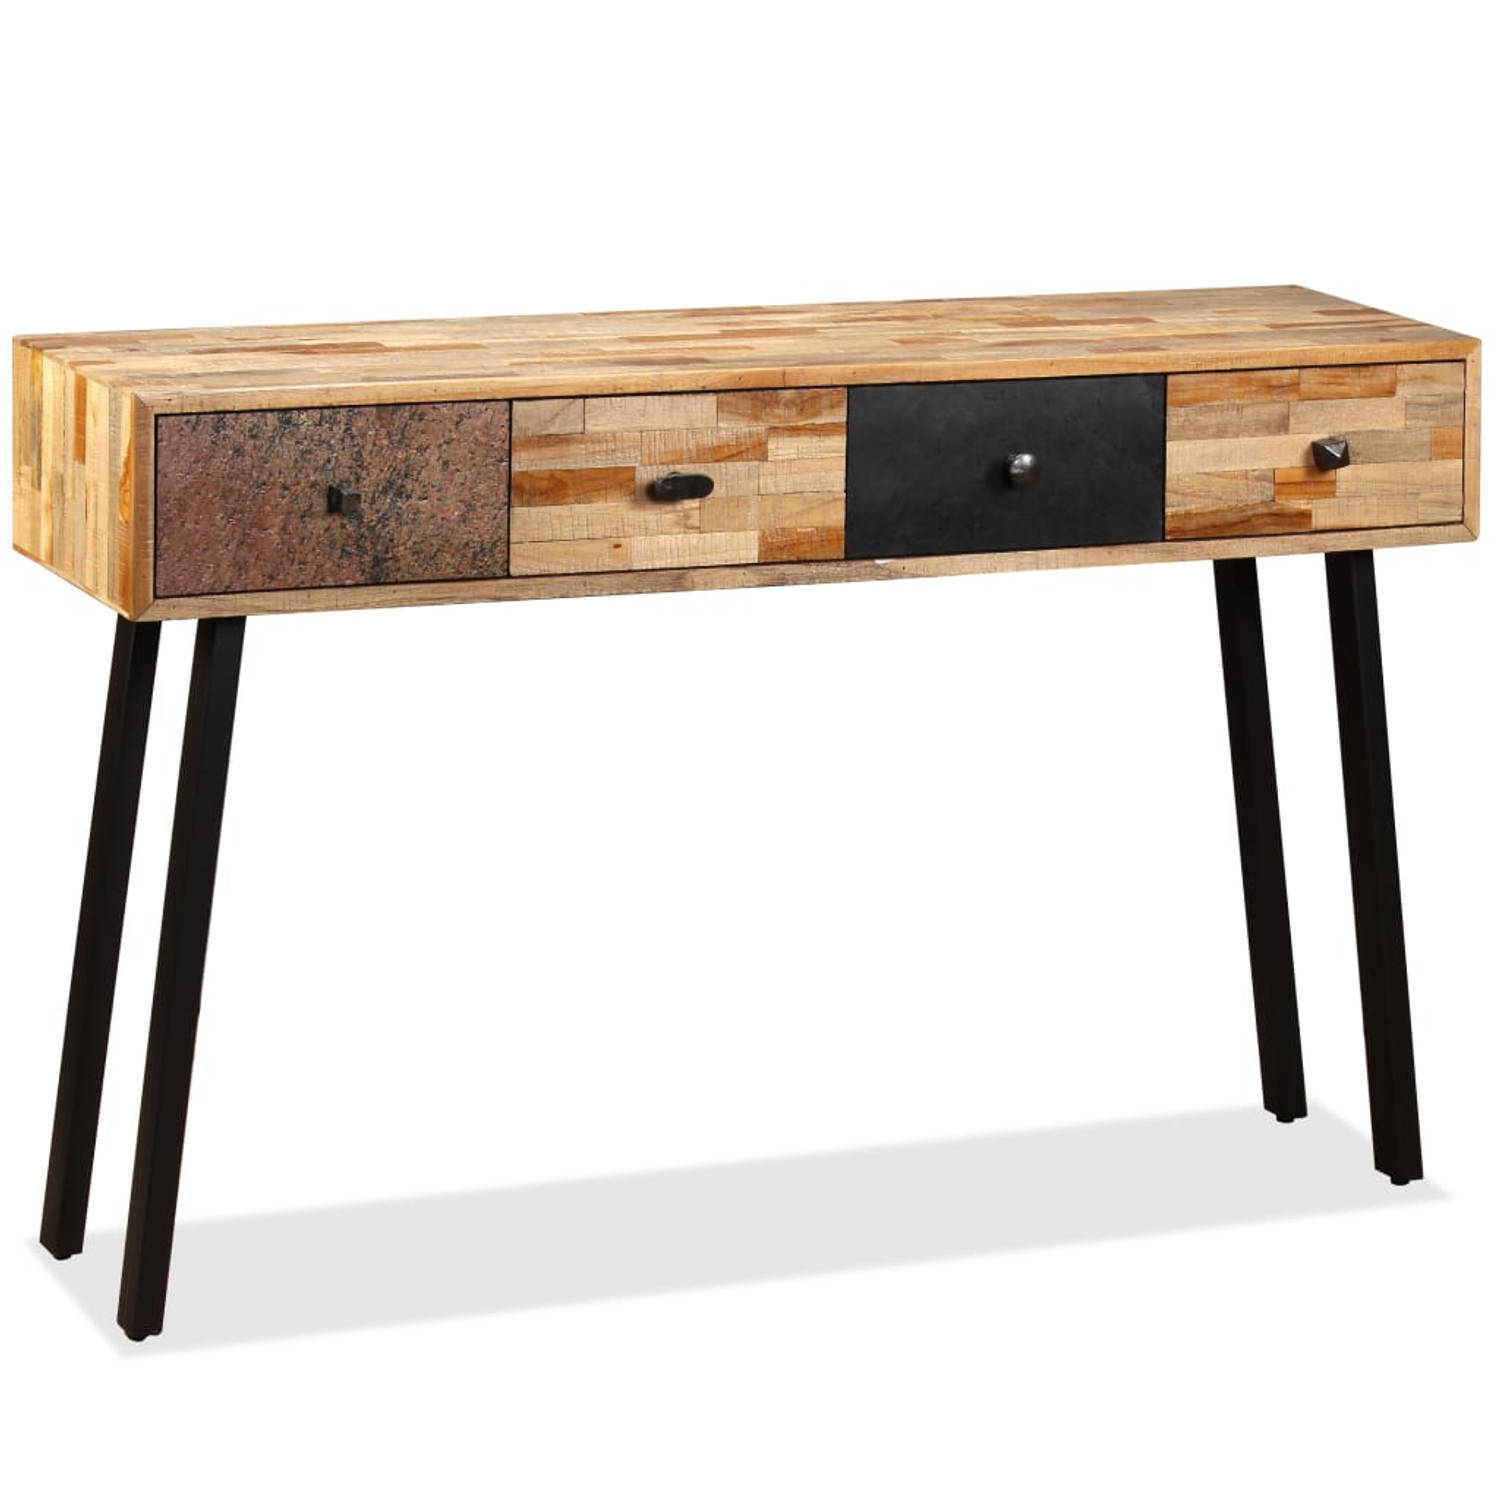 The Living Store Wandtafel 120x30x76 cm massief gerecycled teakhout - Tafel